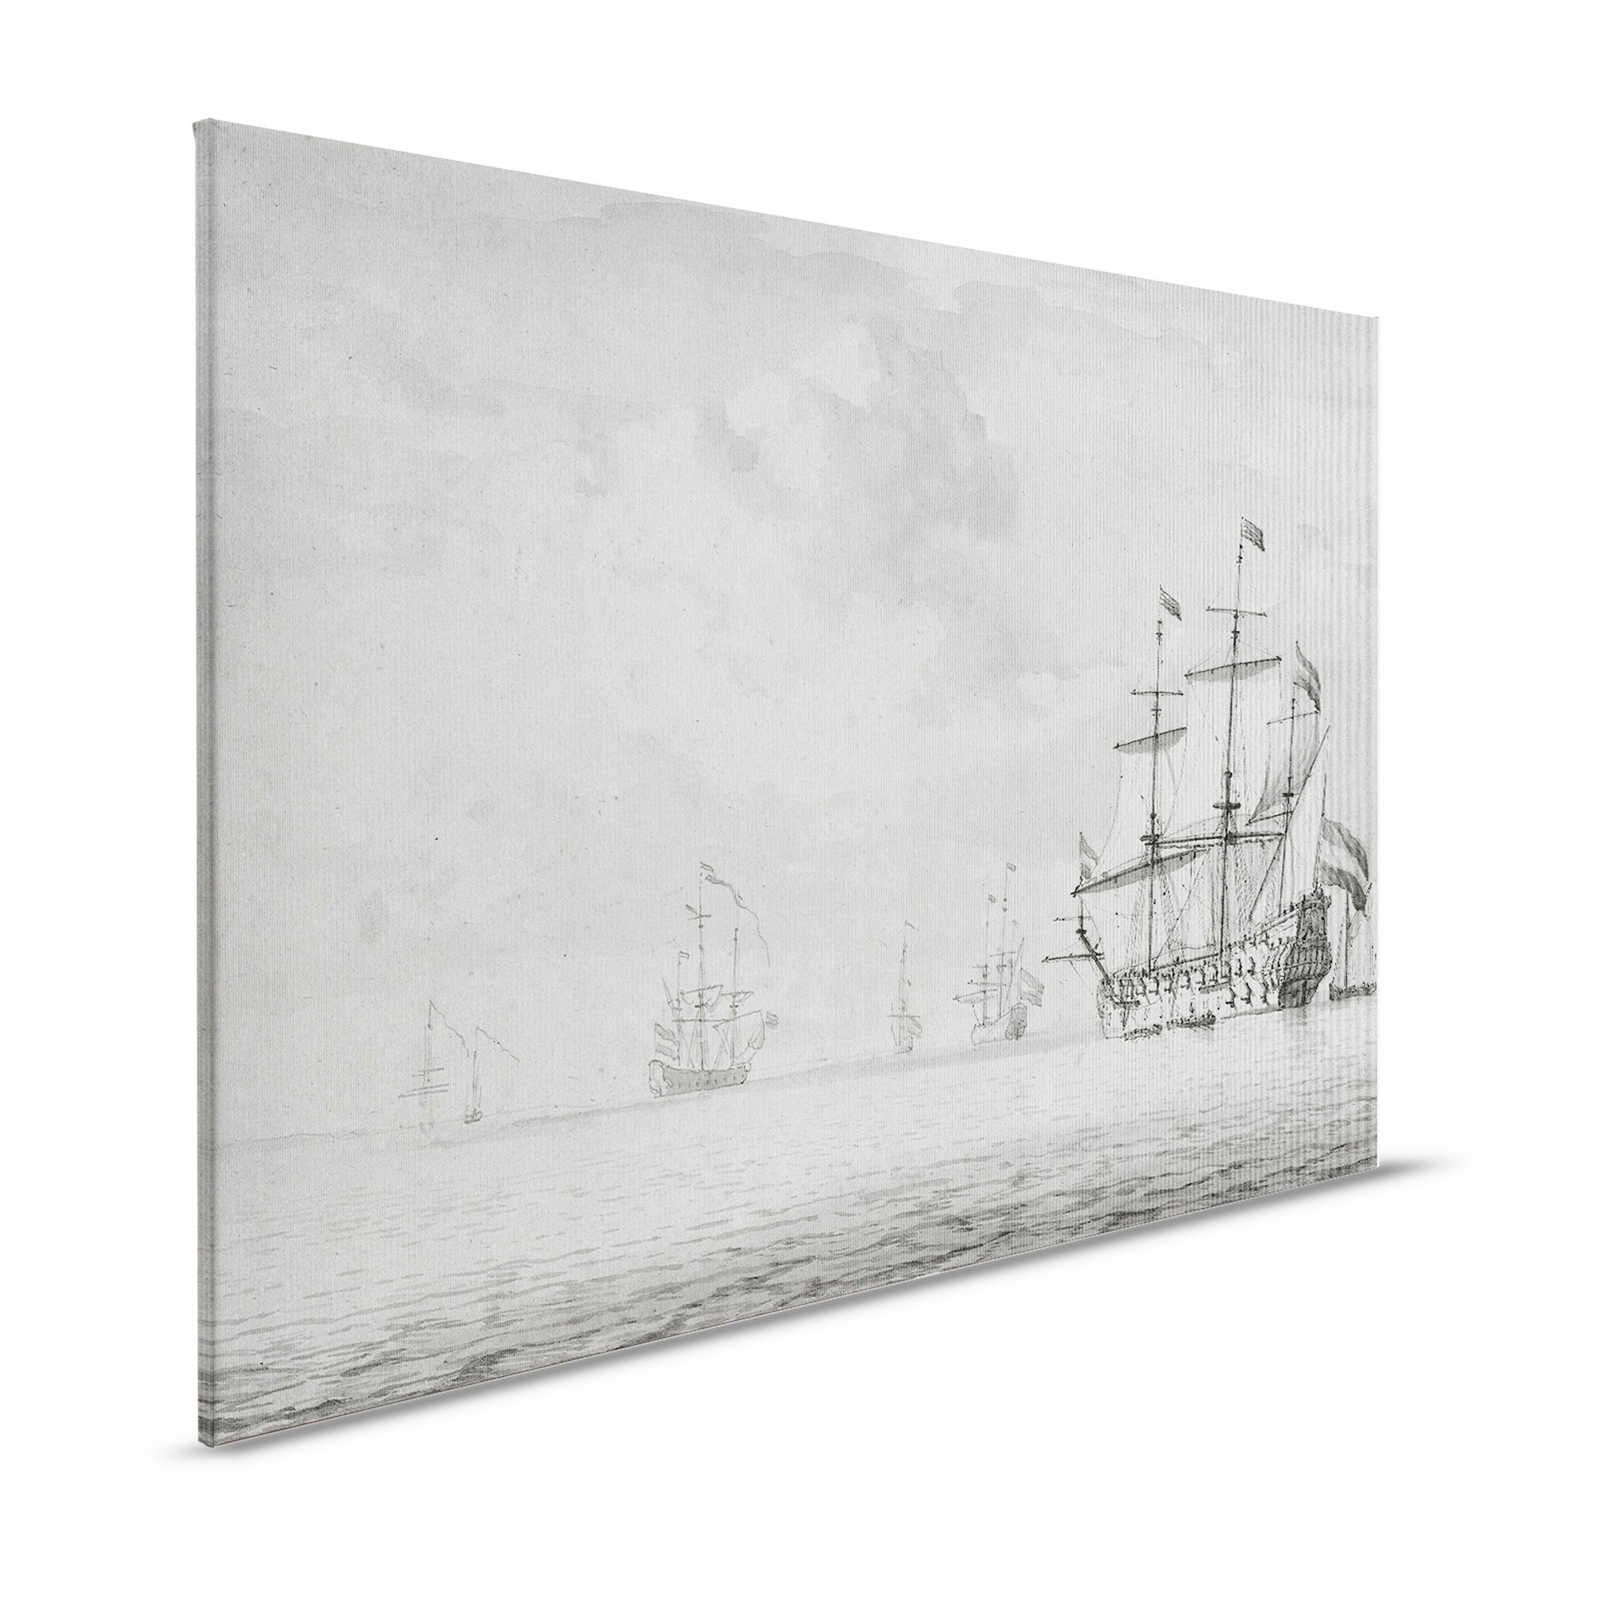 On the Sea 2 - Grey Beige Canvas painting Ships Vintage Painting Style - 1.20 m x 0.80 m
